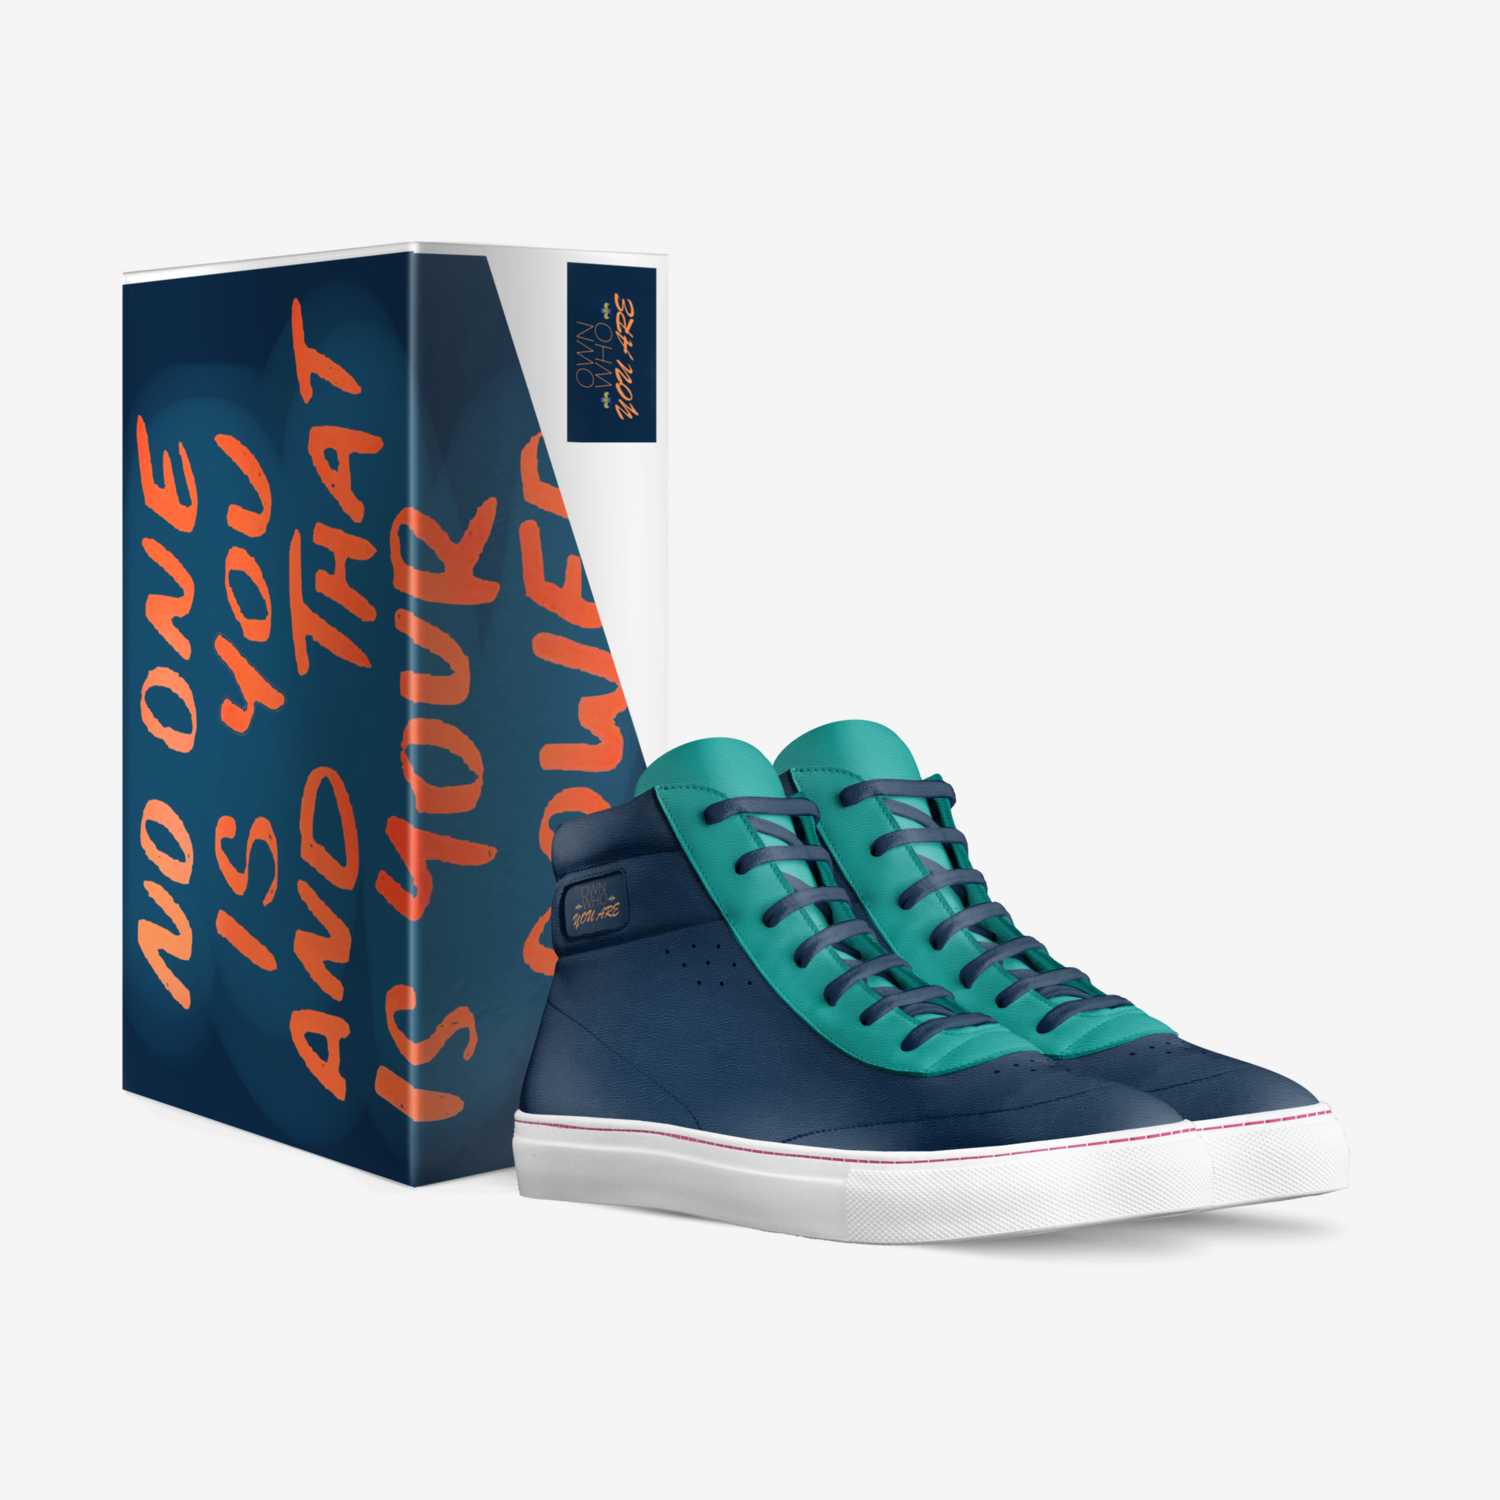 Own Who You Are  custom made in Italy shoes by Tomasz Szalanski | Box view